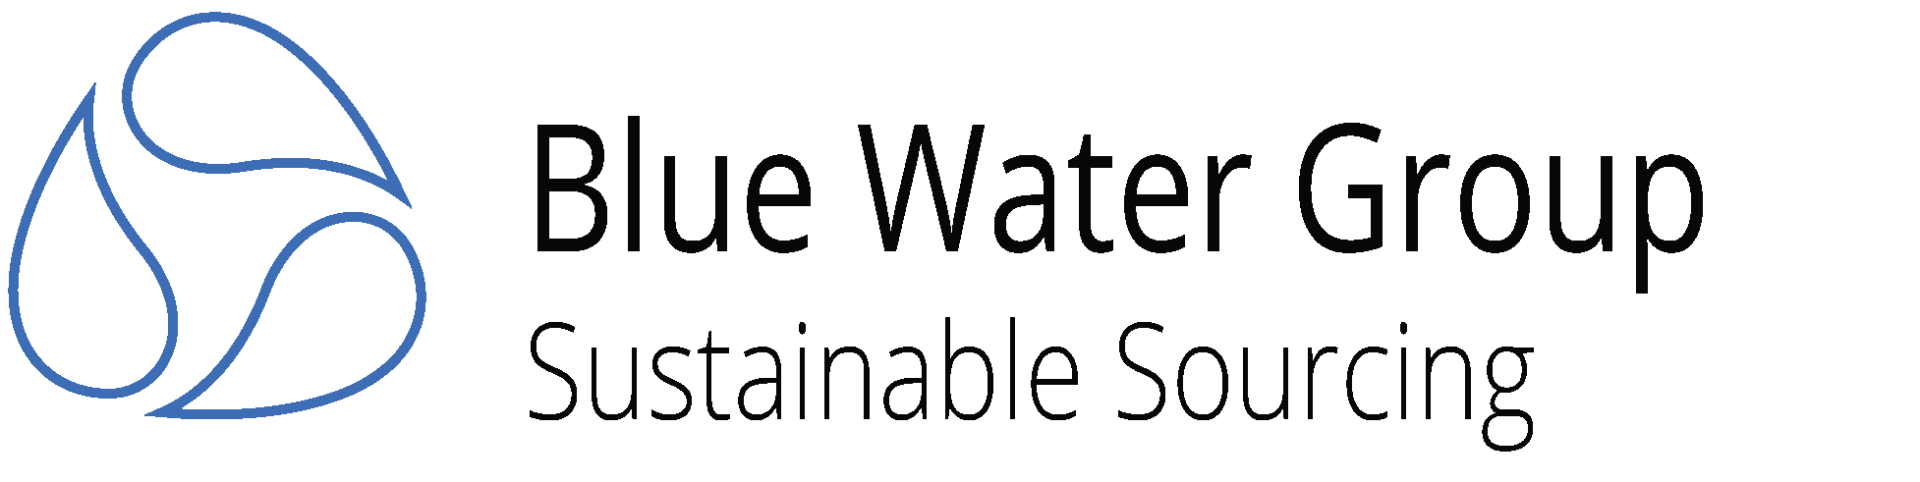 Sustainable Sourcing & Manufacturing